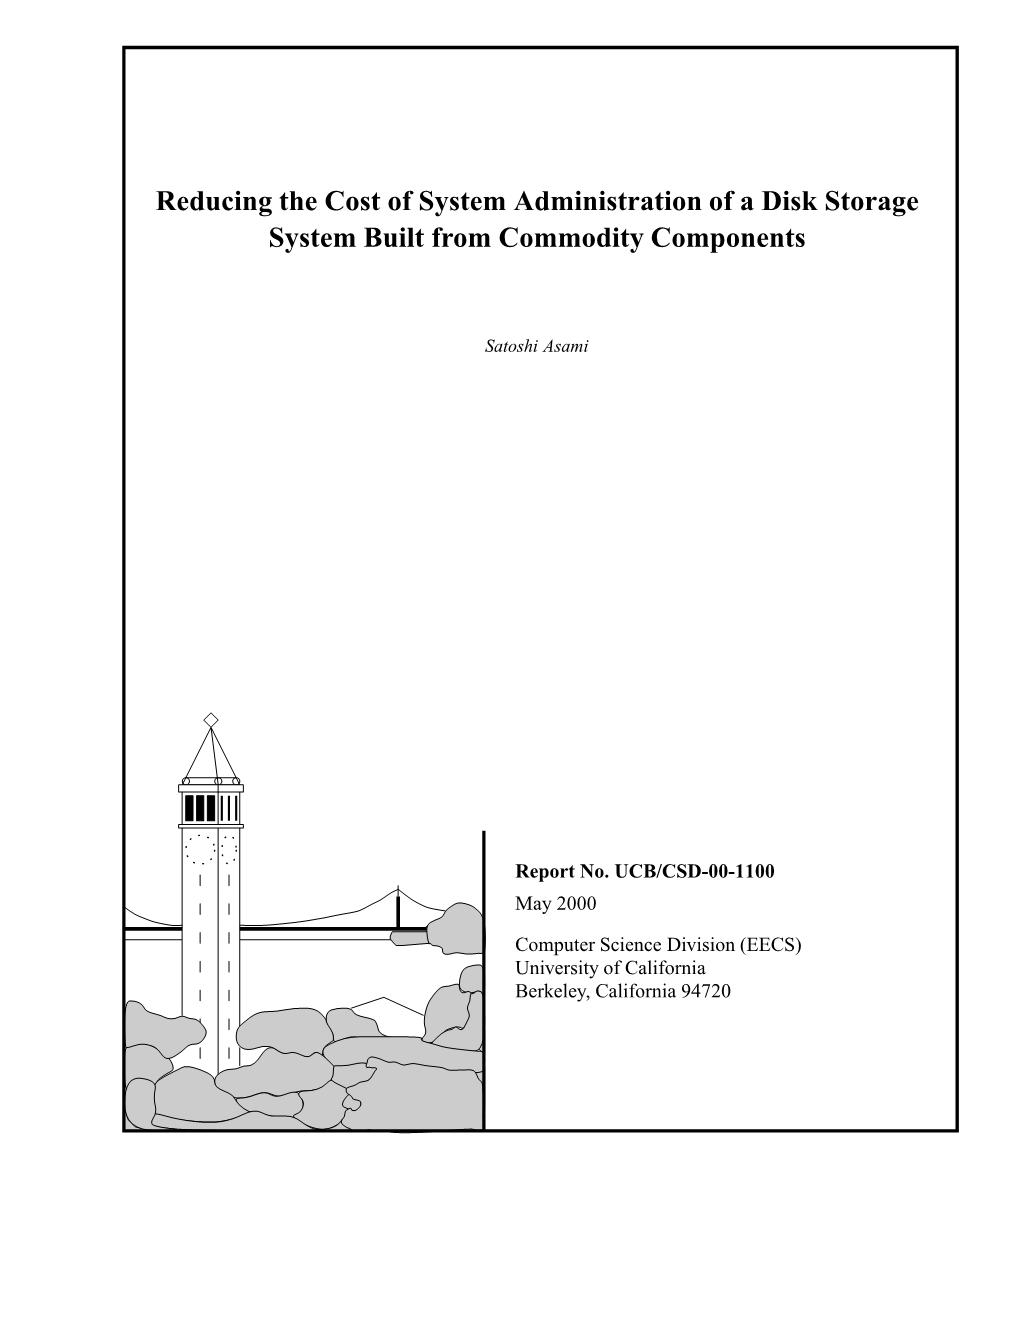 Reducing the Cost of System Administration of a Disk Storage System Built from Commodity Components